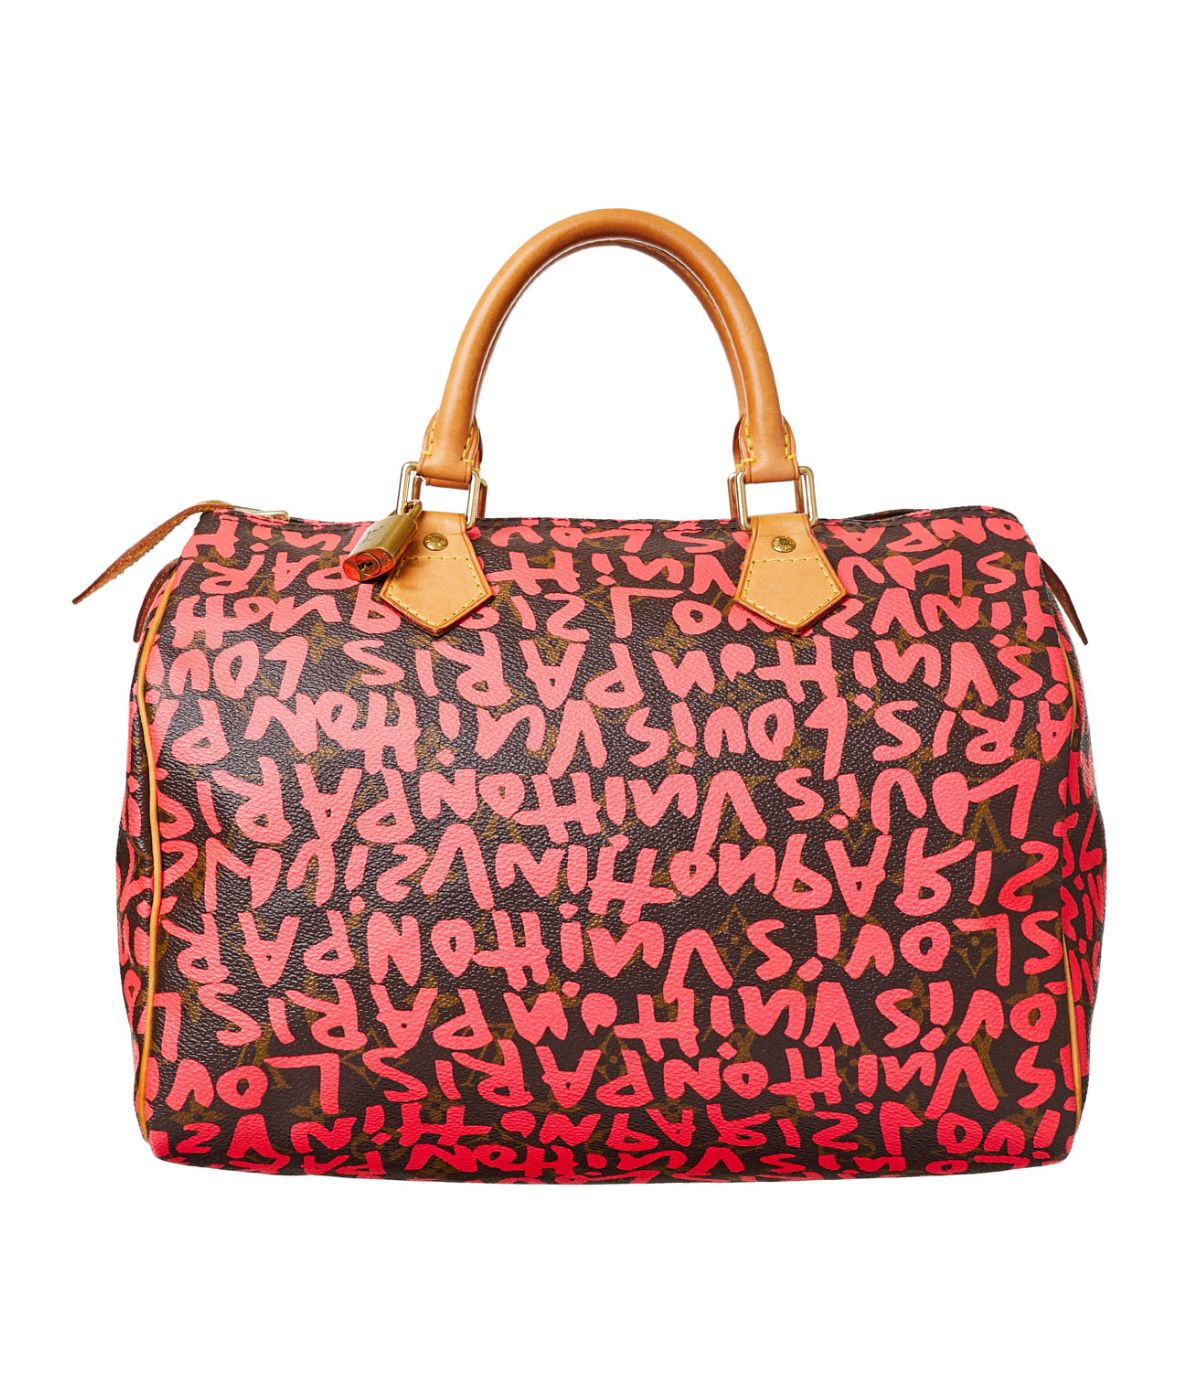 Pre-Owned Stephen Sprouse Neon Speedy Bag